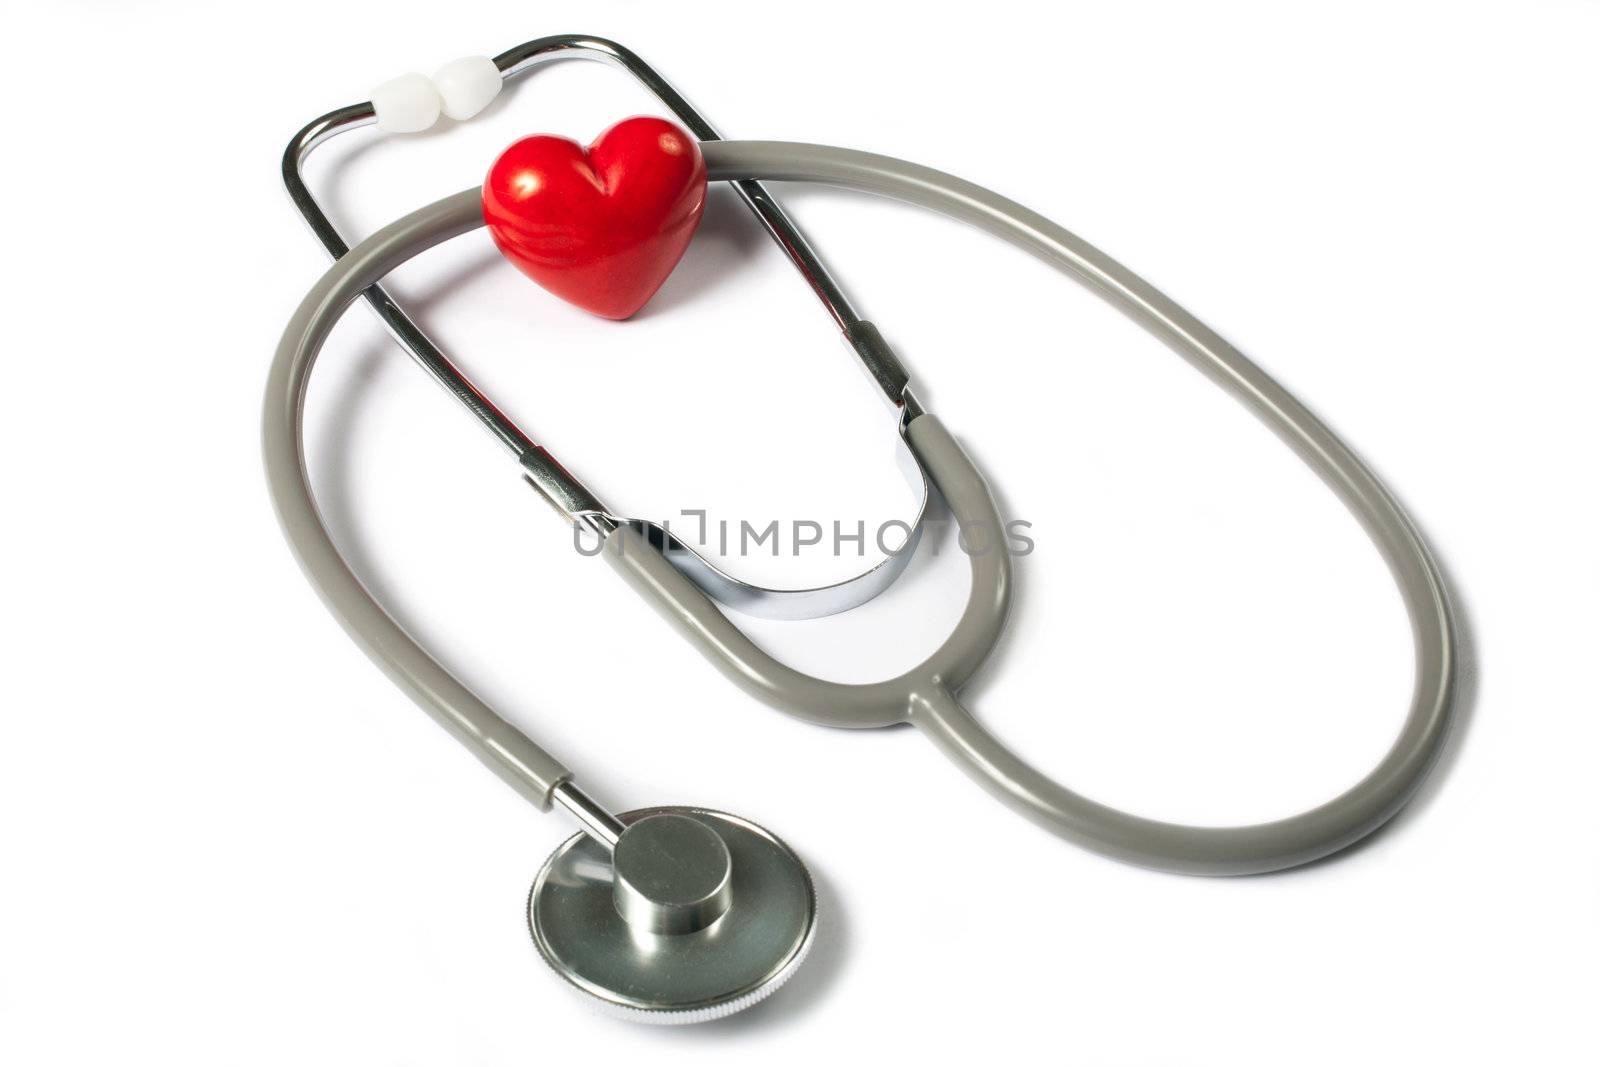 Stethoscope & red heart by Portokalis